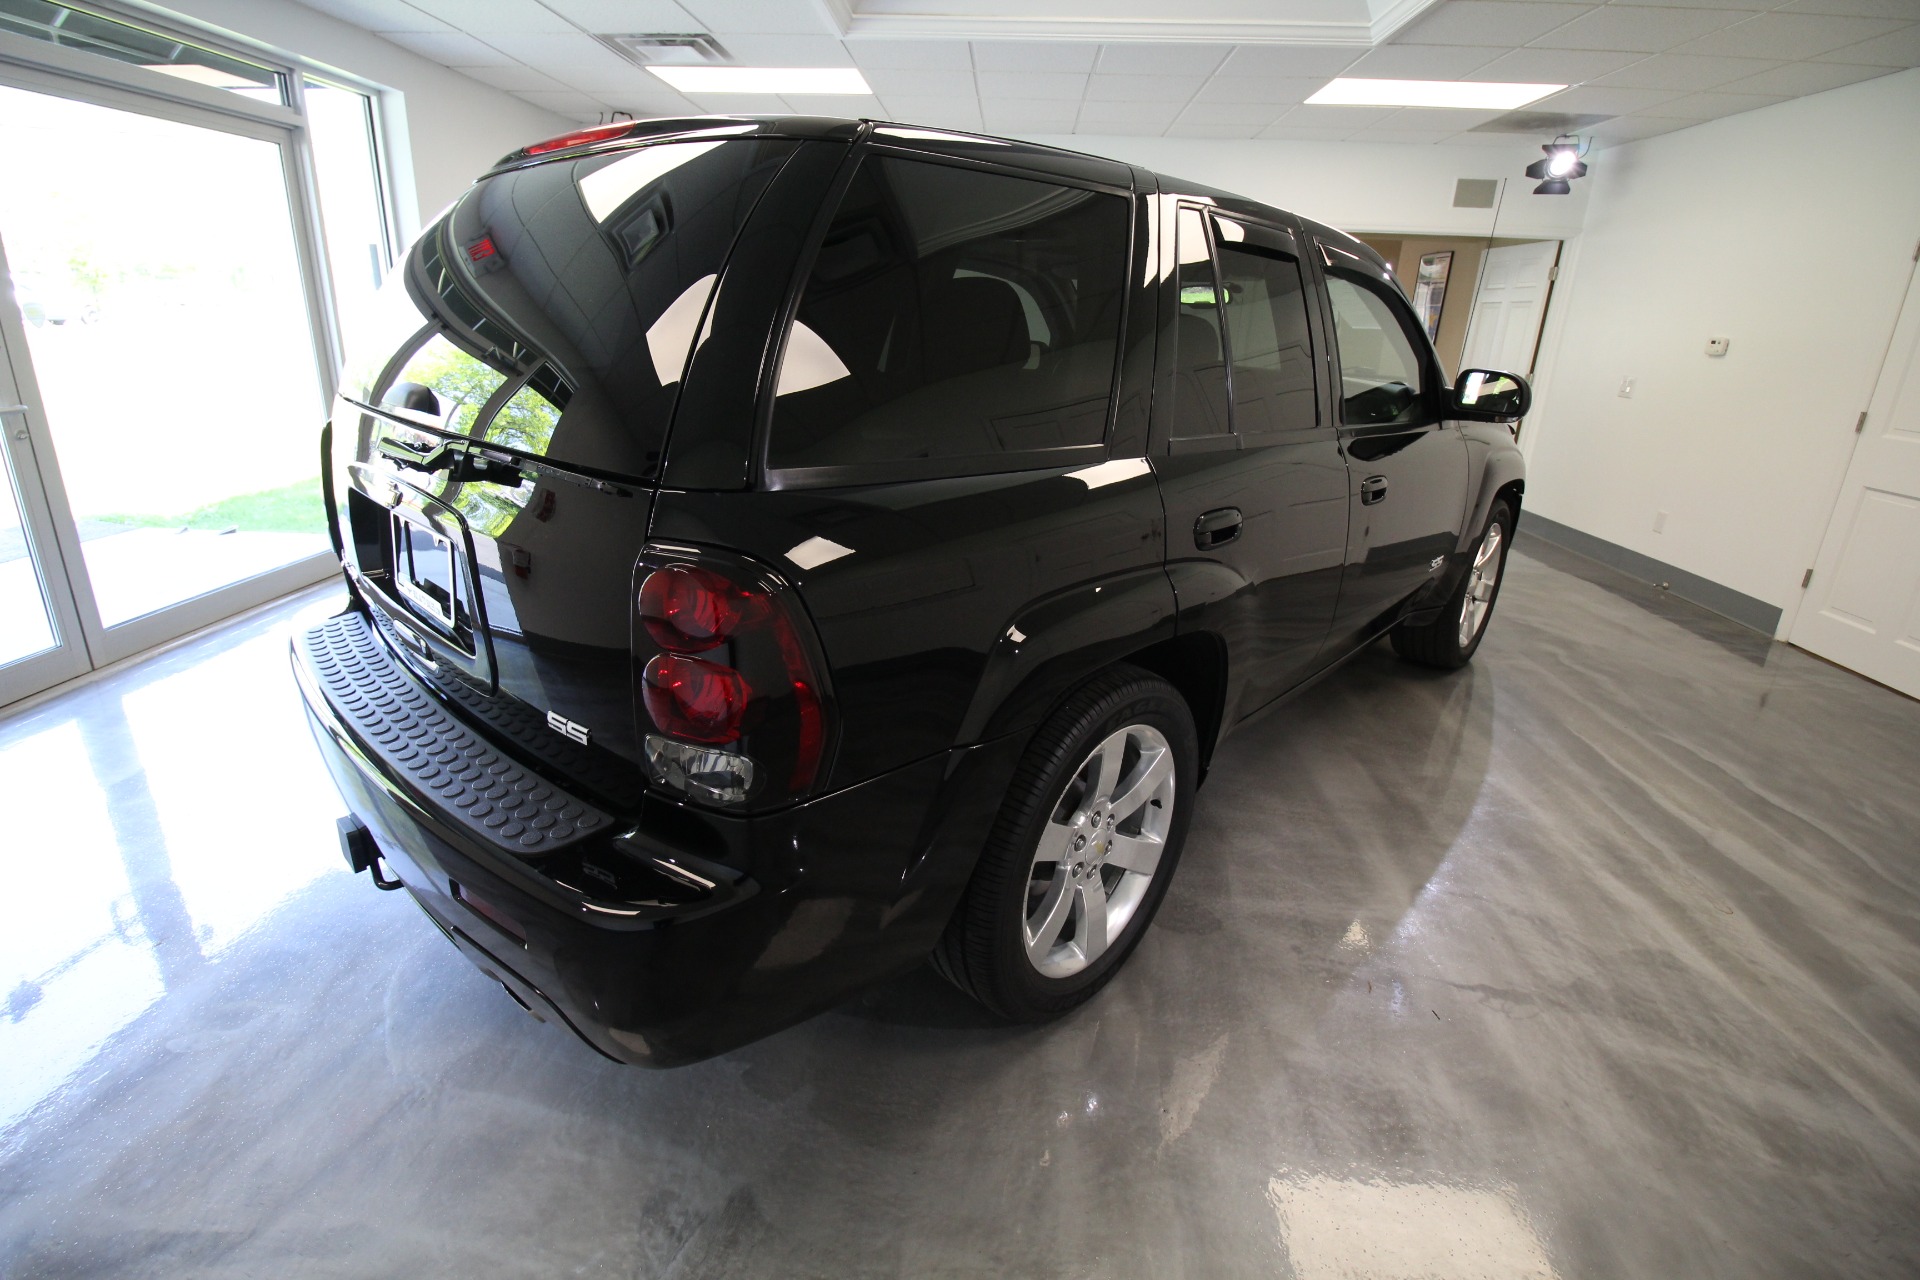 Used 2006 Black Chevrolet TrailBlazer SS LT COLLECTOR''''S QUALITY SUPERB INSIDE AND OUT LOW MILES 56K | Albany, NY